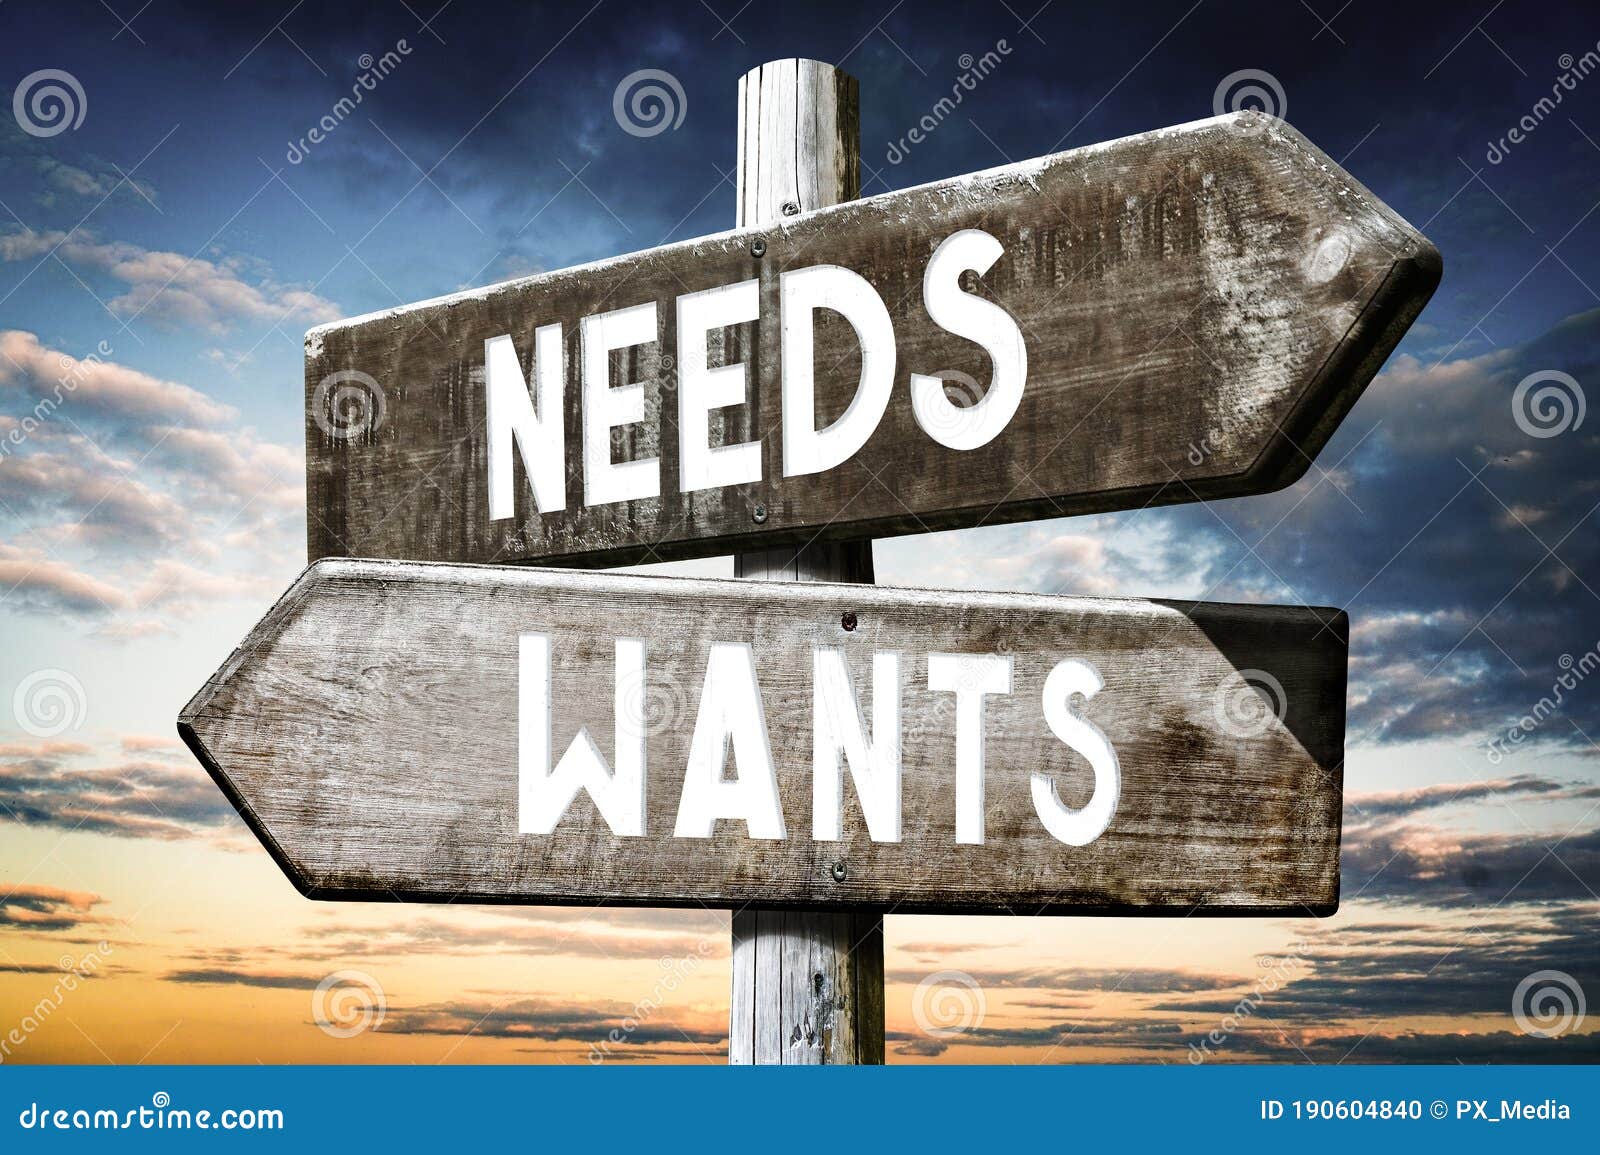 wants, needs - wooden signpost, roadsign with two arrows